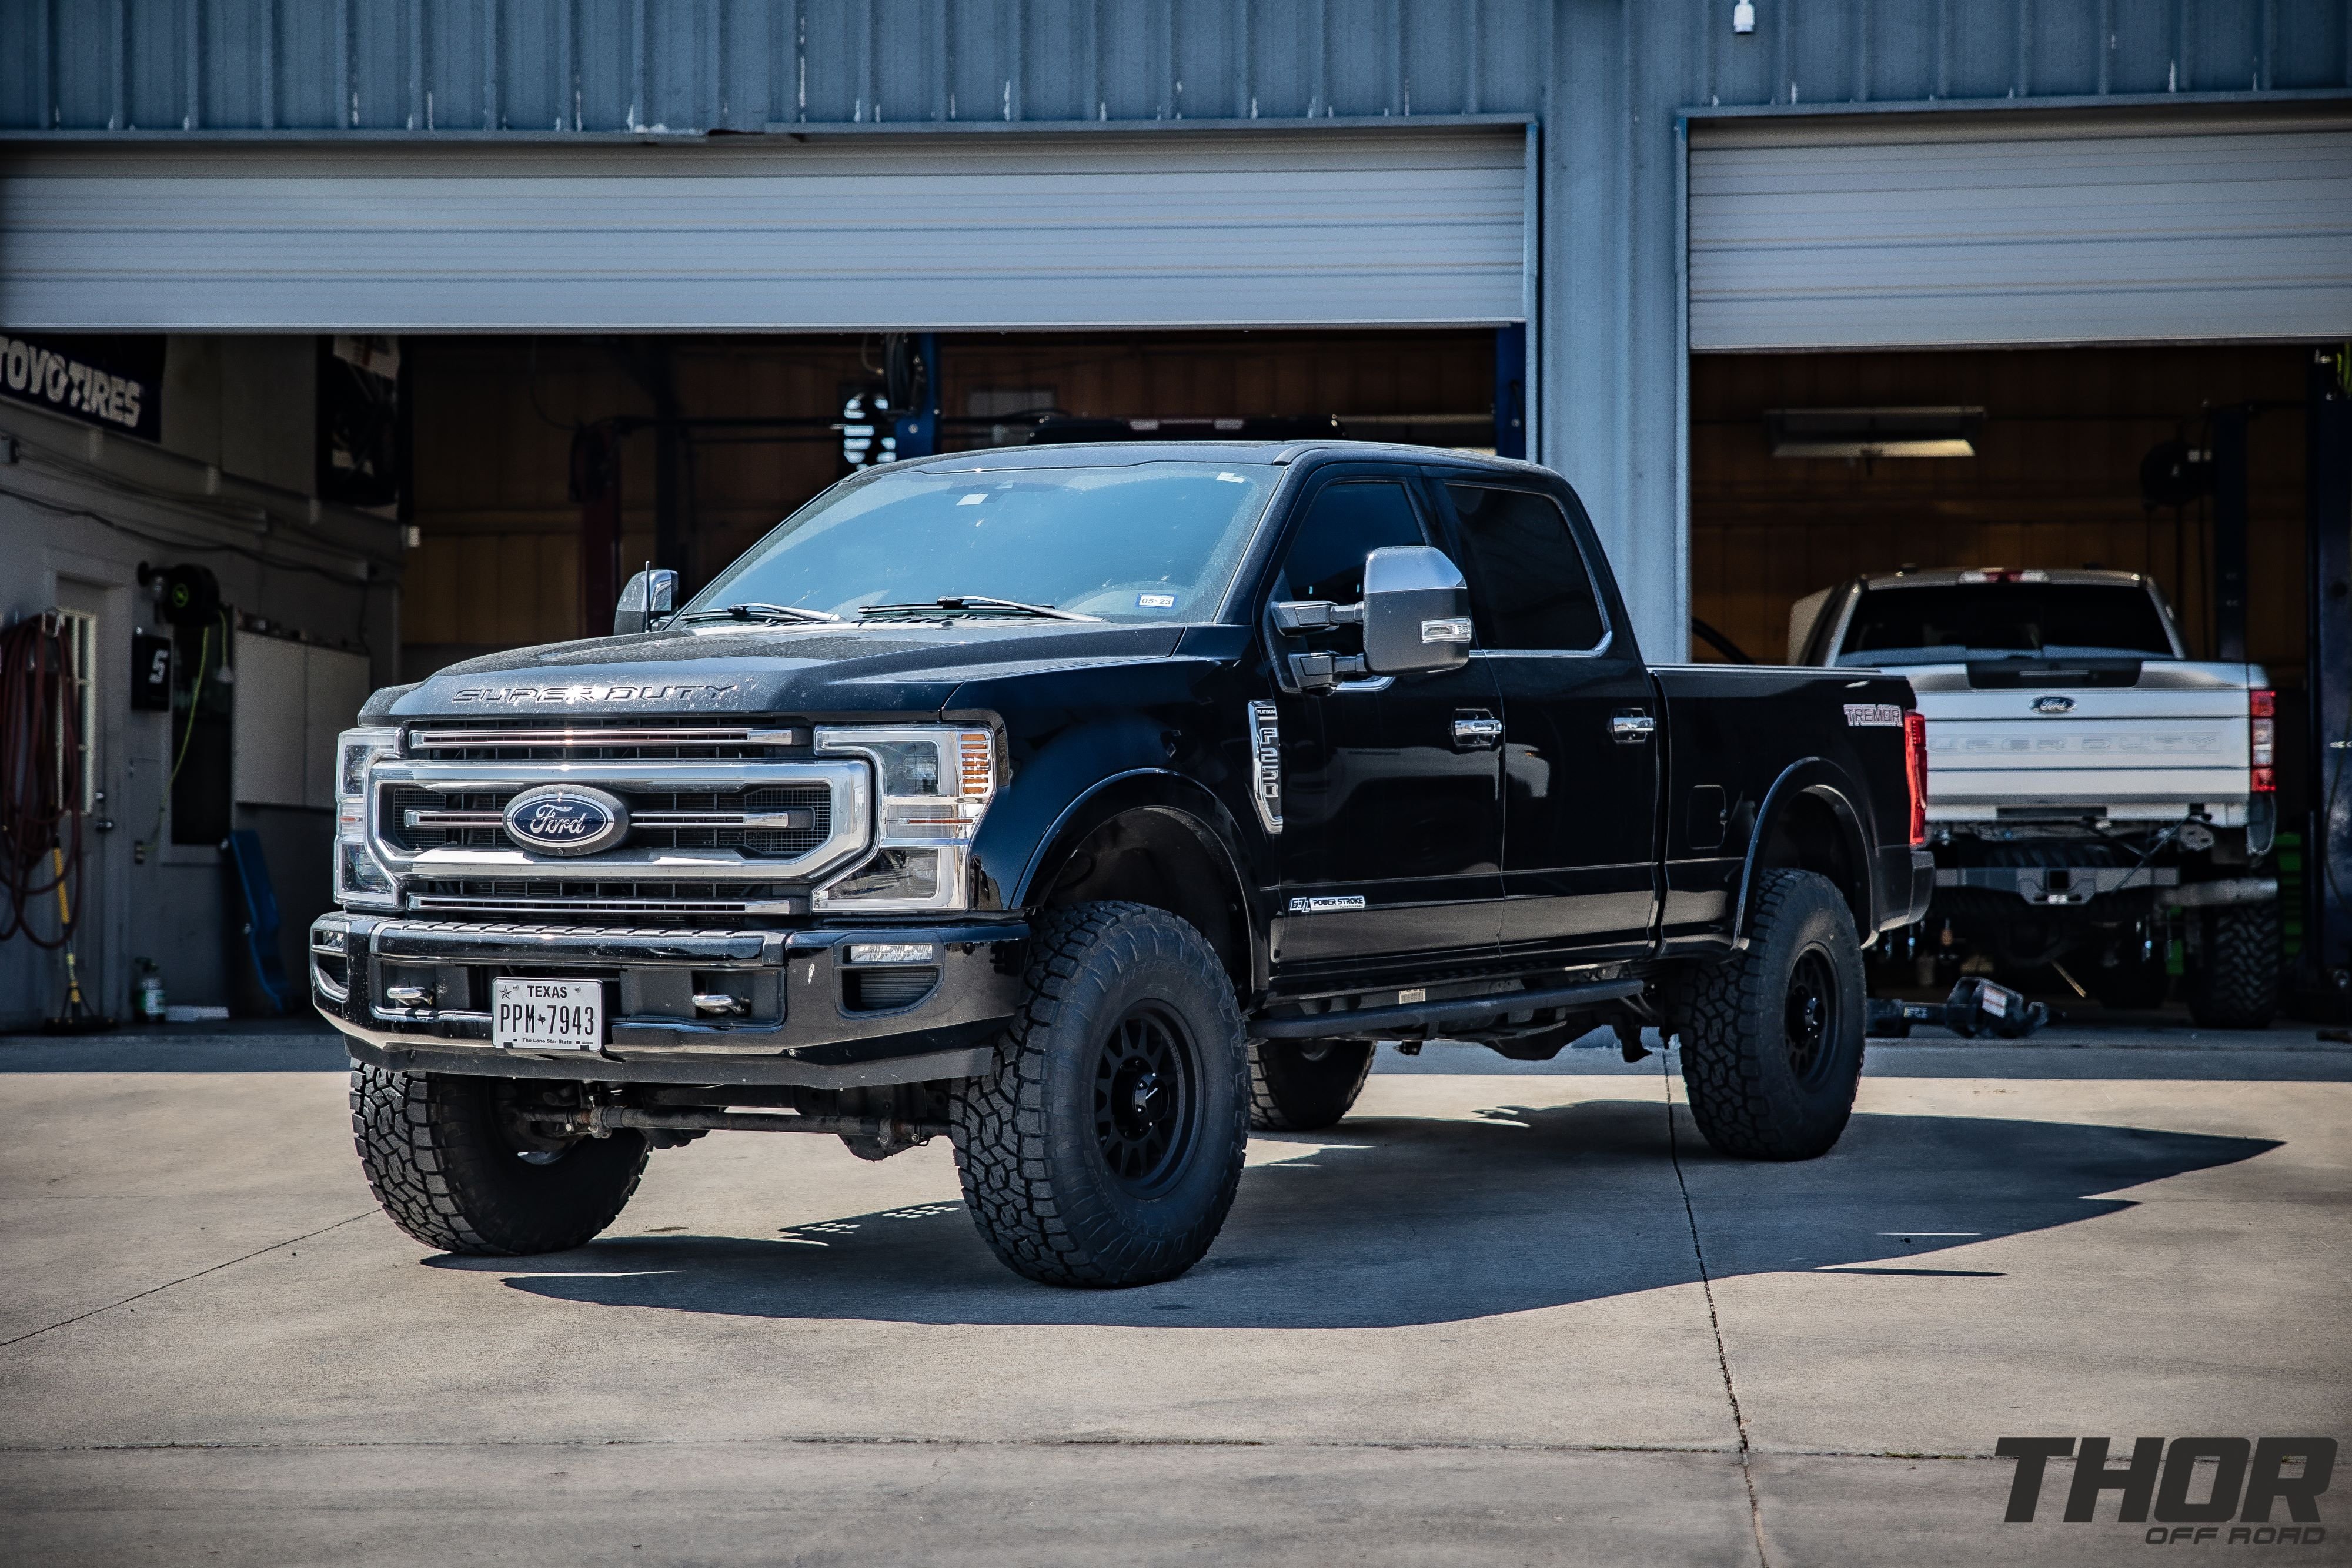 2022 Ford F-250 Super Duty Platinum in Black with Carli Backcountry 3.5" Suspension Kit, Carli High Mount Steering Stabilizer, Carli Torsion Sway Bar, Method MR704 HD 17x9" Bead Grip Wheels, 37x12.50R17 Toyo Open Country A/T III Tires